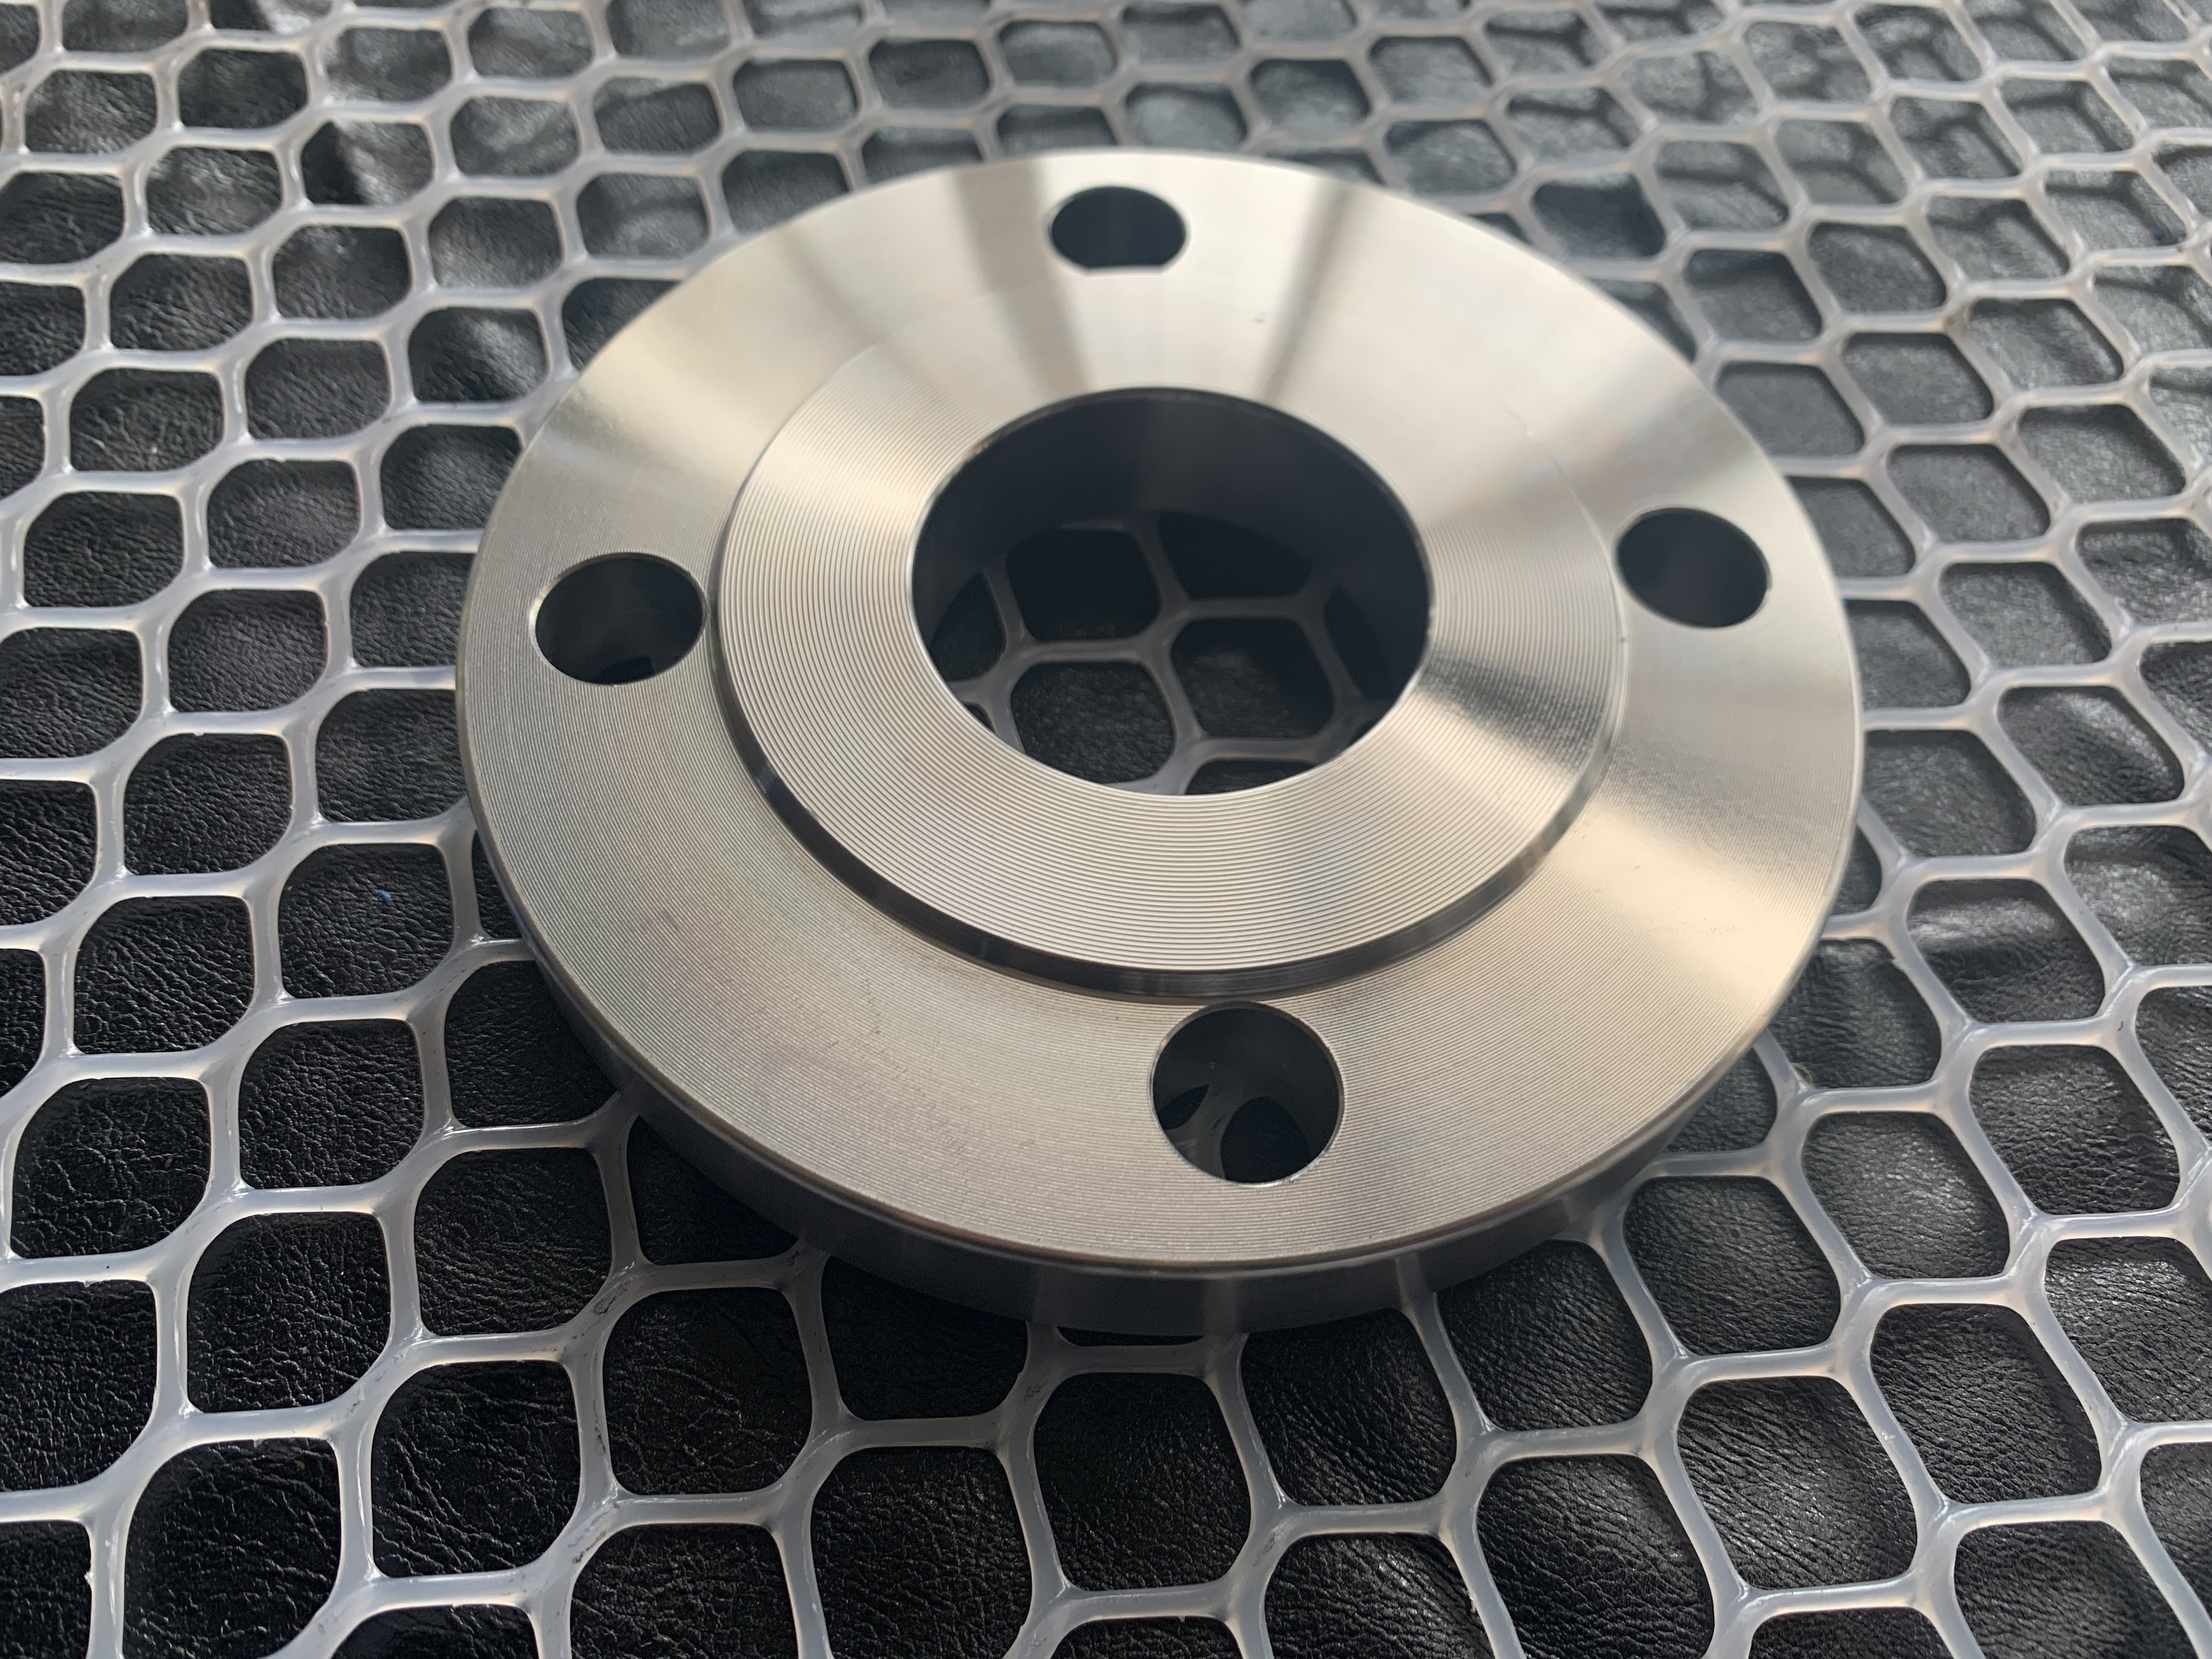 Alloy stainless steel forged PL FF flange CDPL028